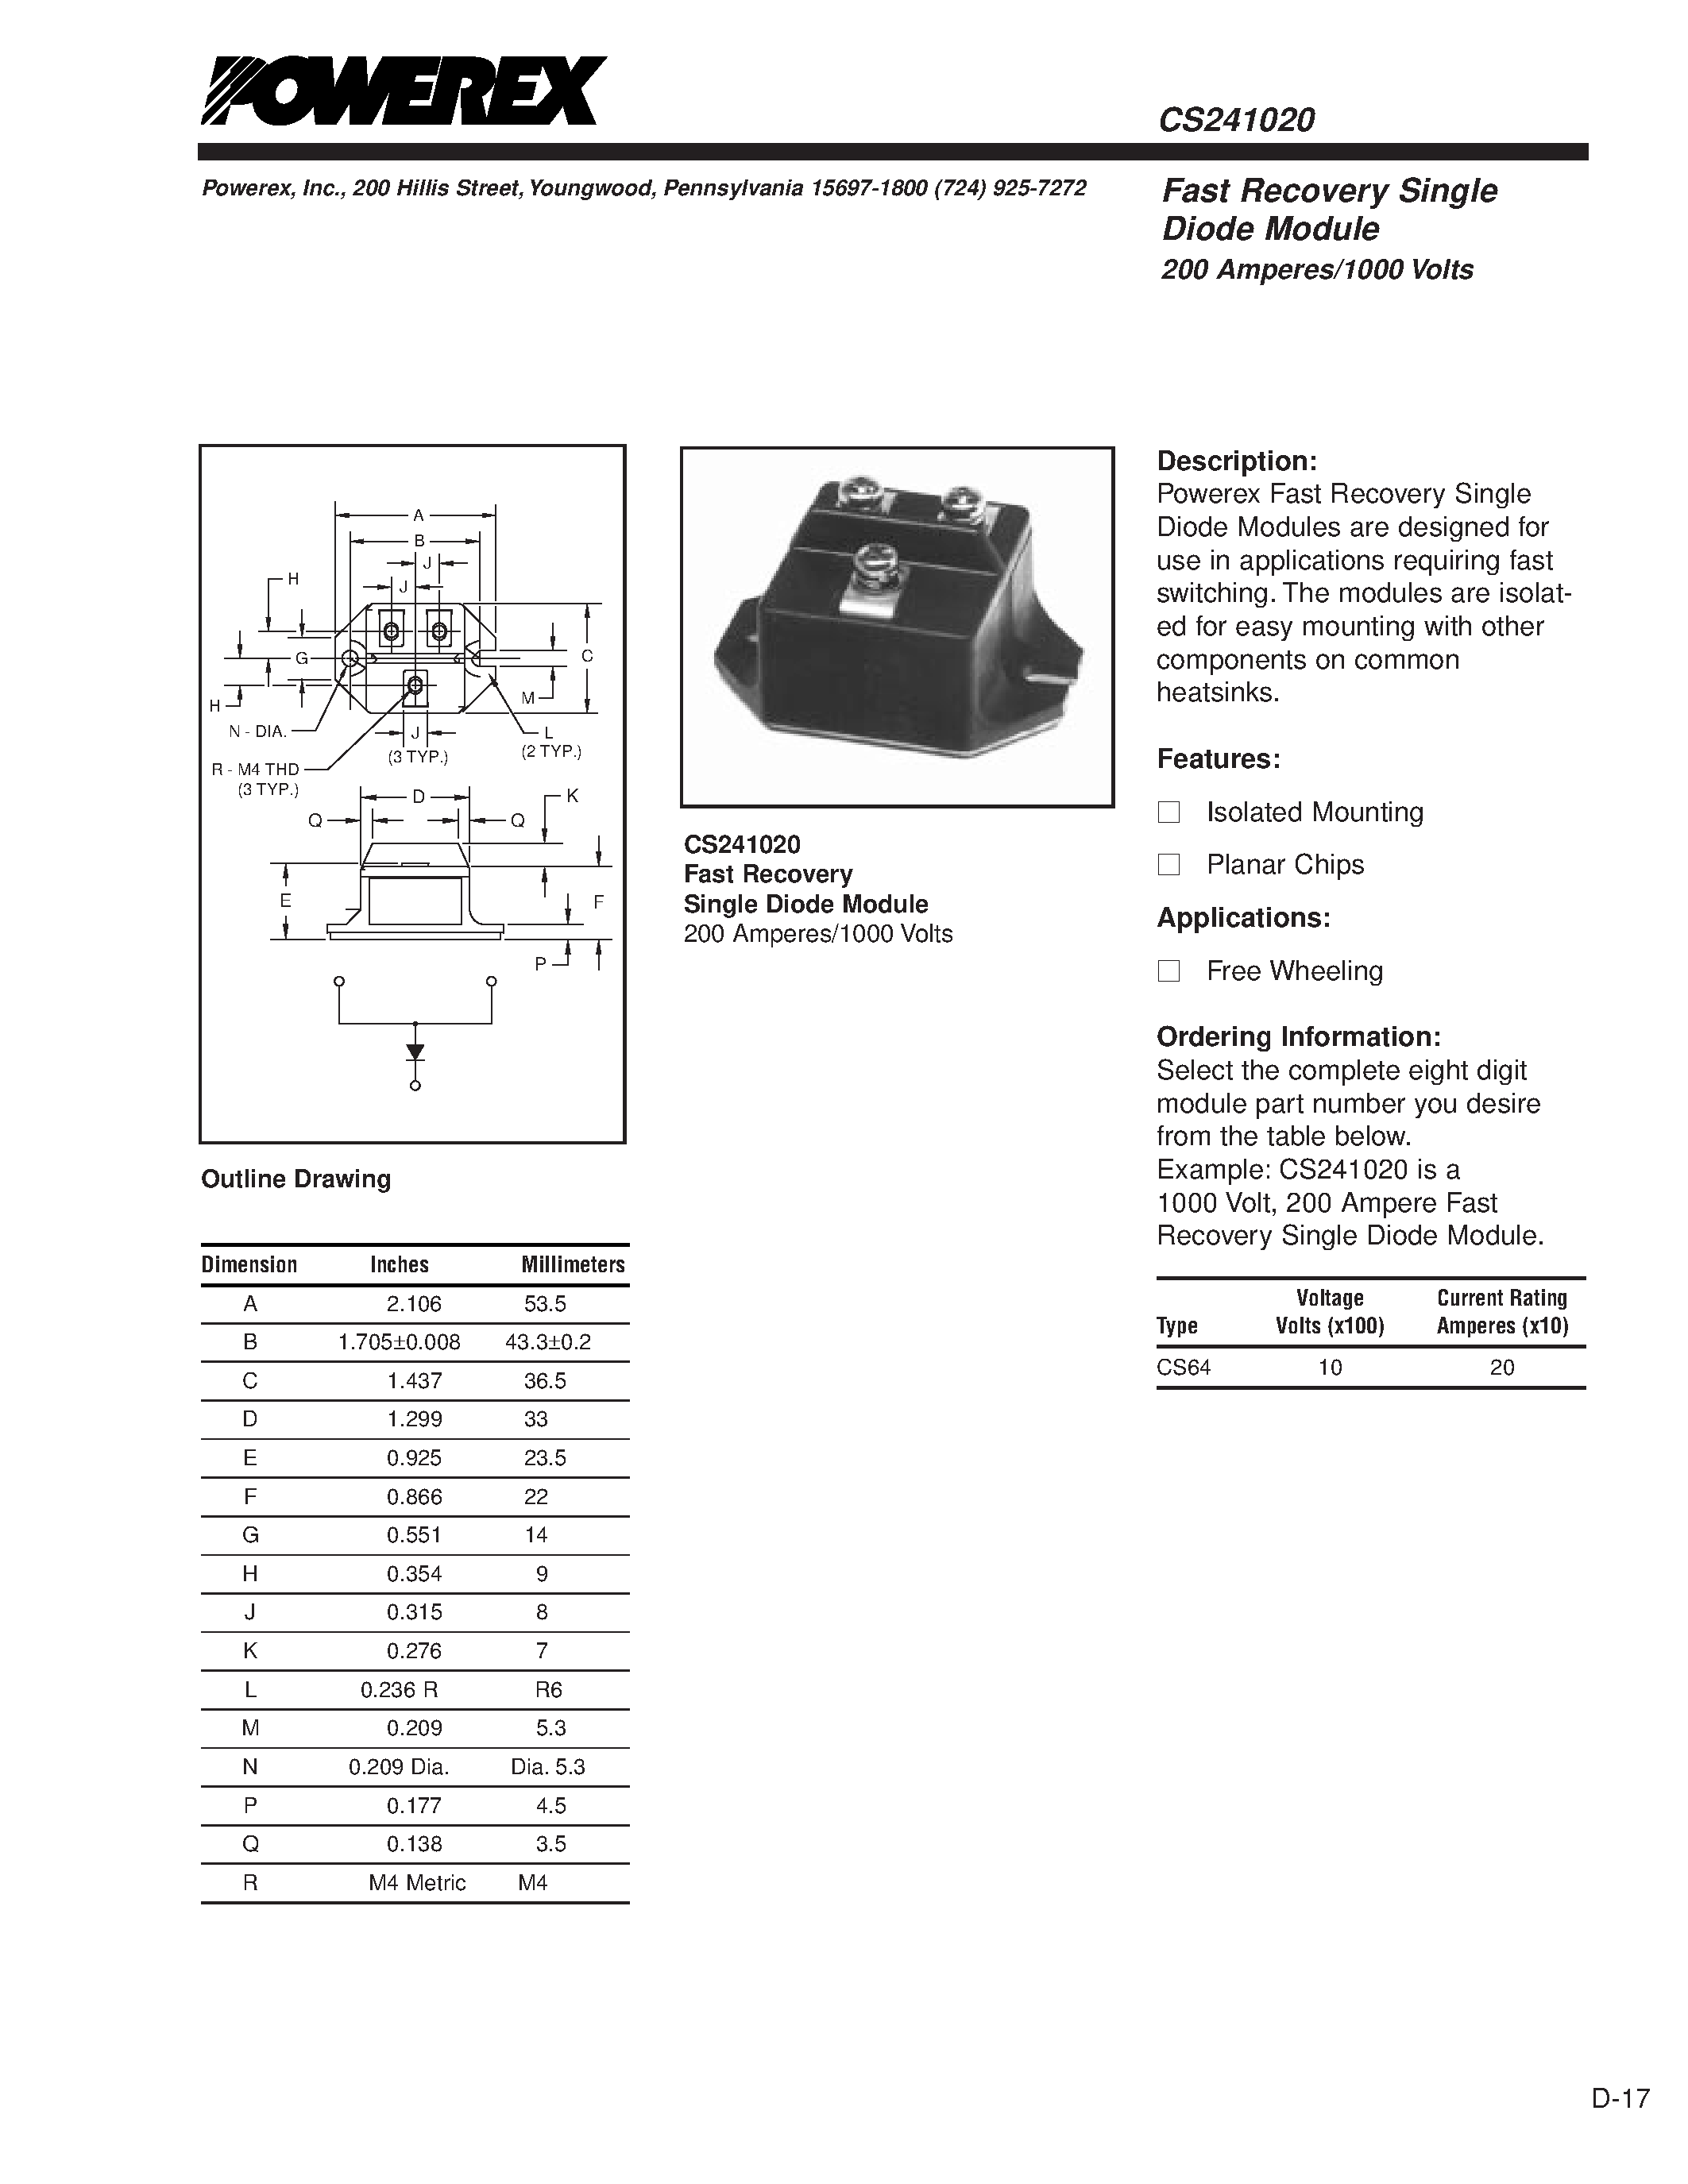 Datasheet CS241020 - Fast Recovery Single Diode Module 200 Amperes/1000 Volts page 1